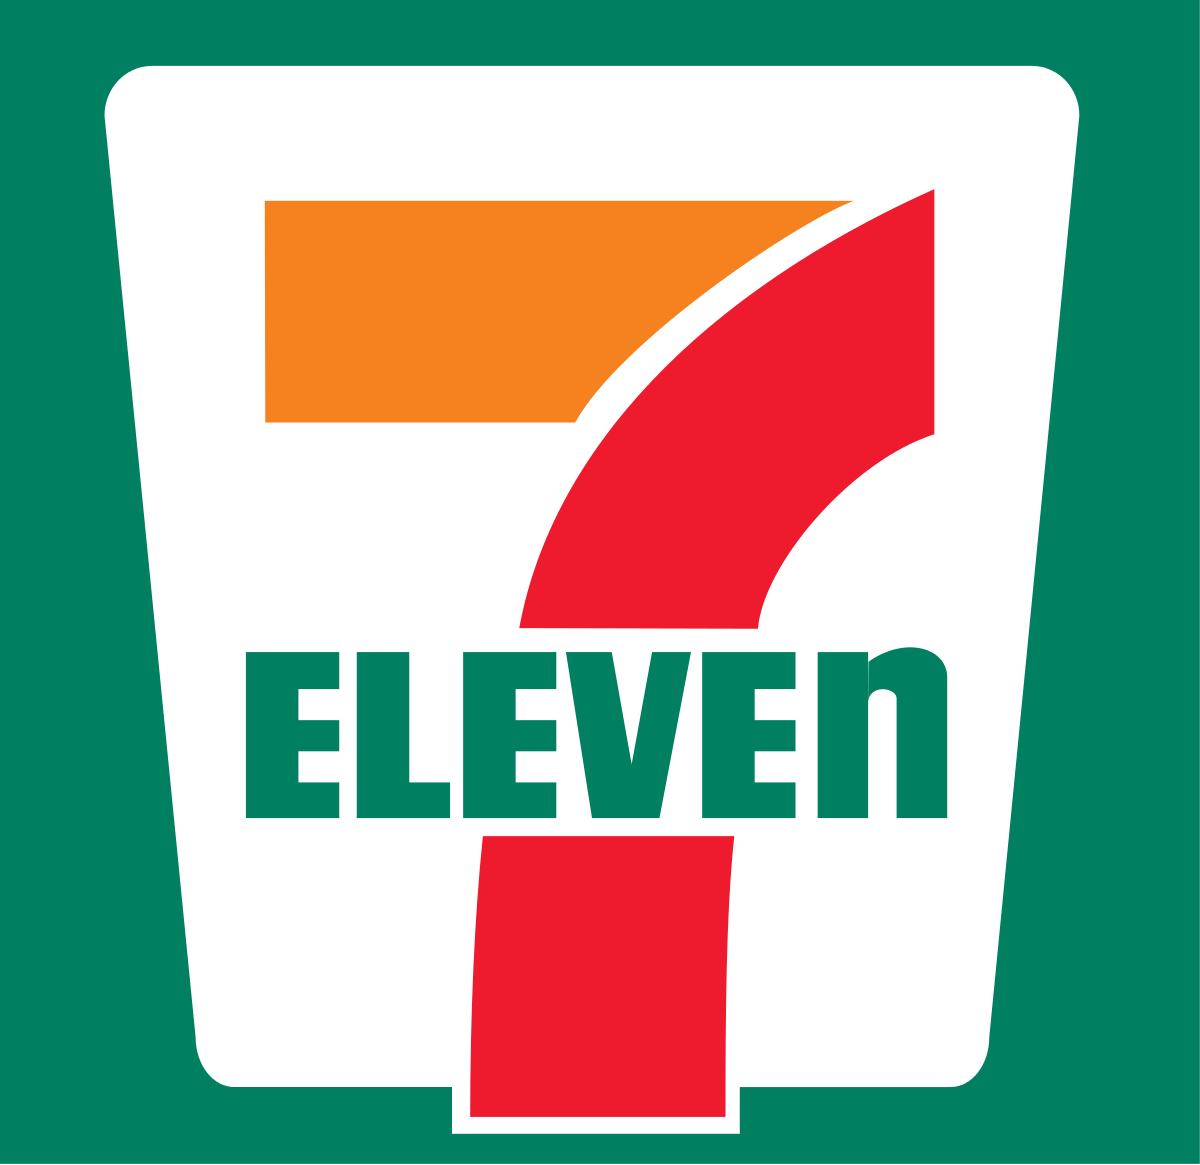 Eleven Letter Logo - The N In 7 Eleven Is The Only Letter That Isn't Uppercase